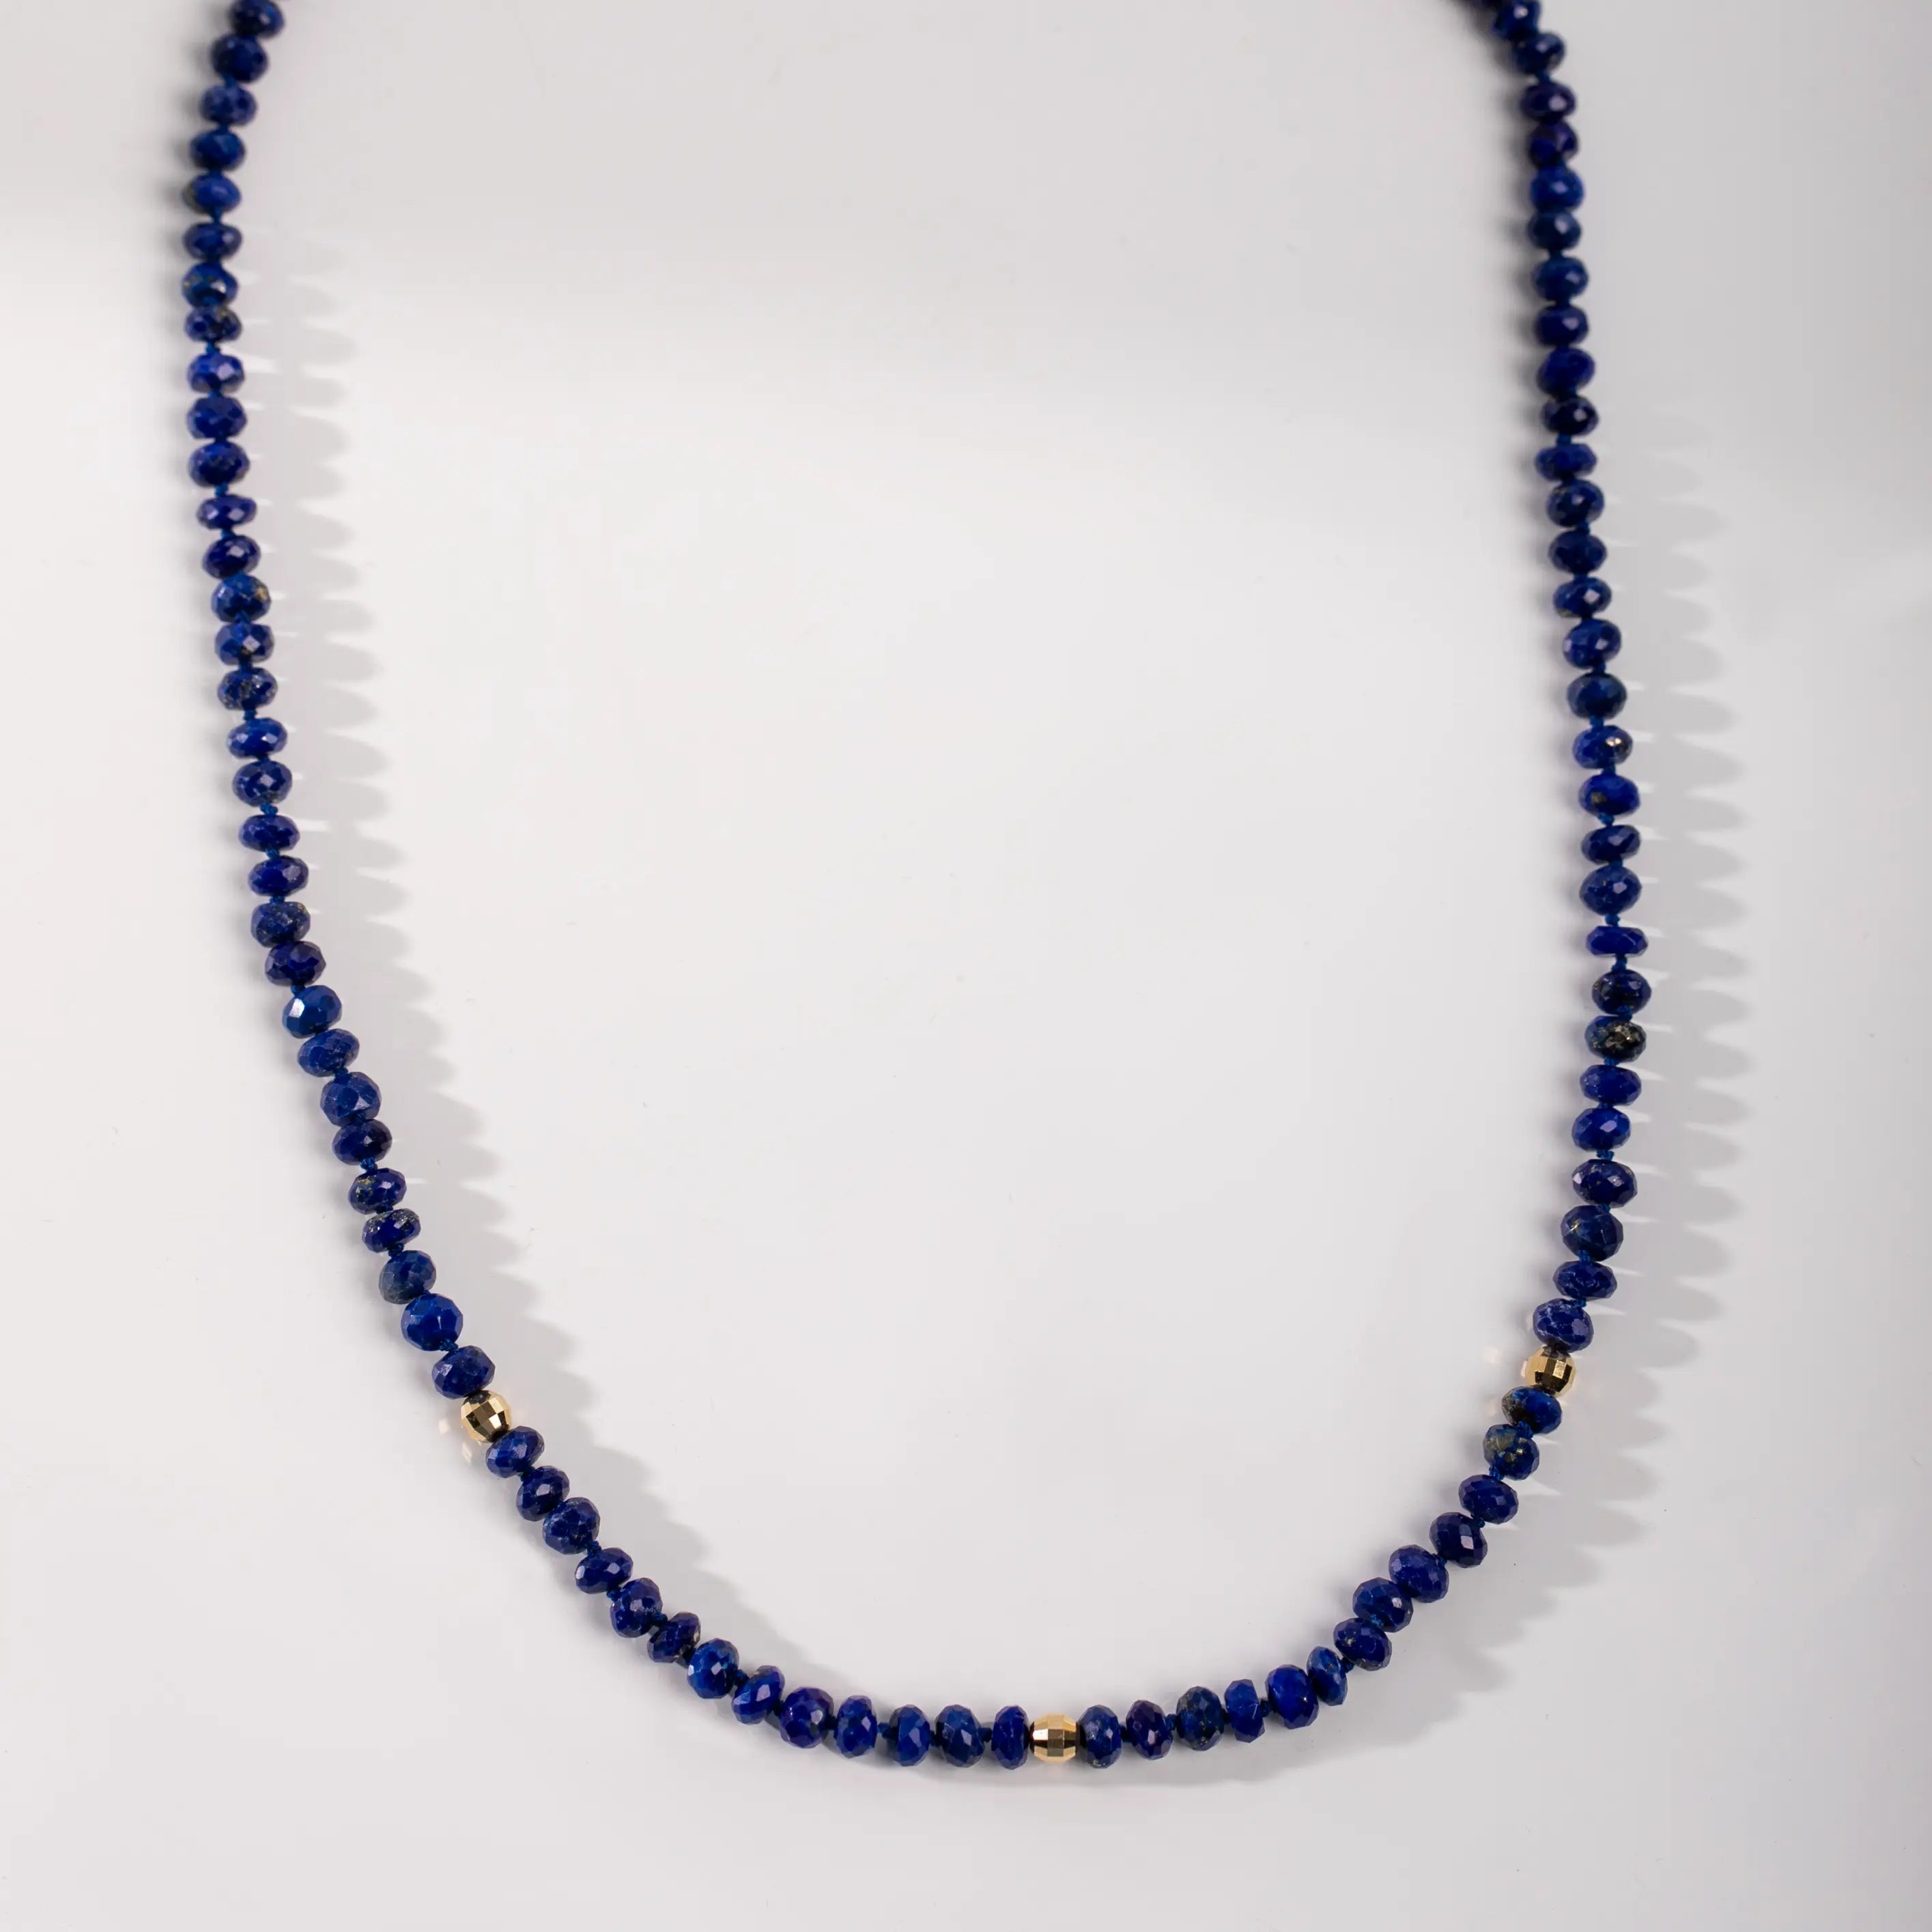 Lapis Necklace and Gold Beads